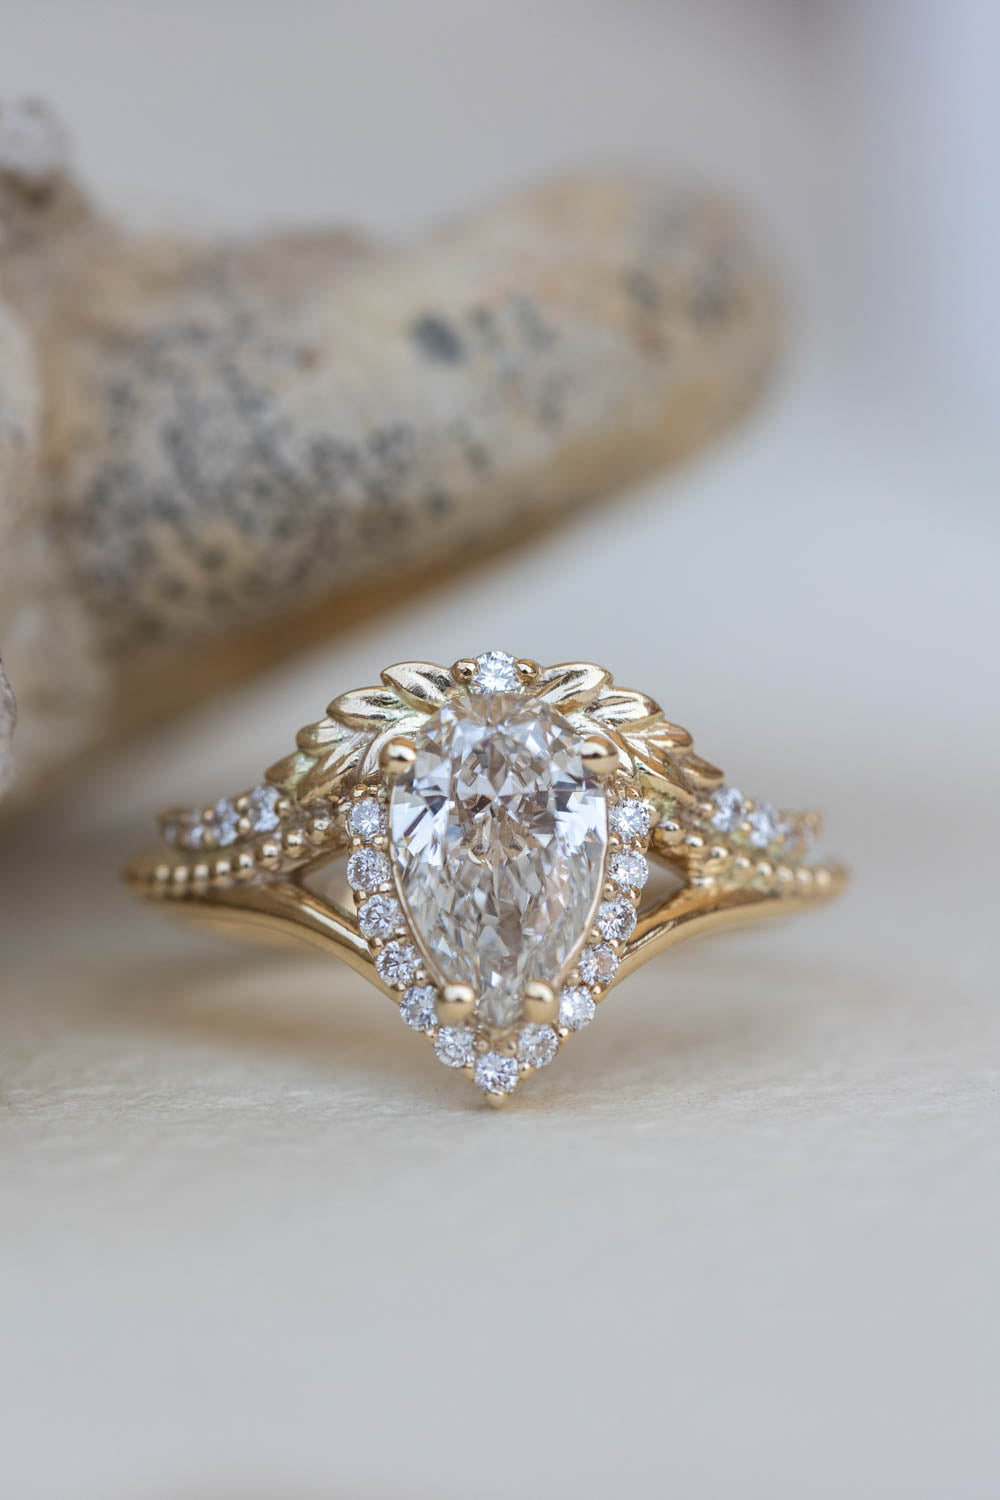 Discover 209+ vintage diamond rings gold super hot